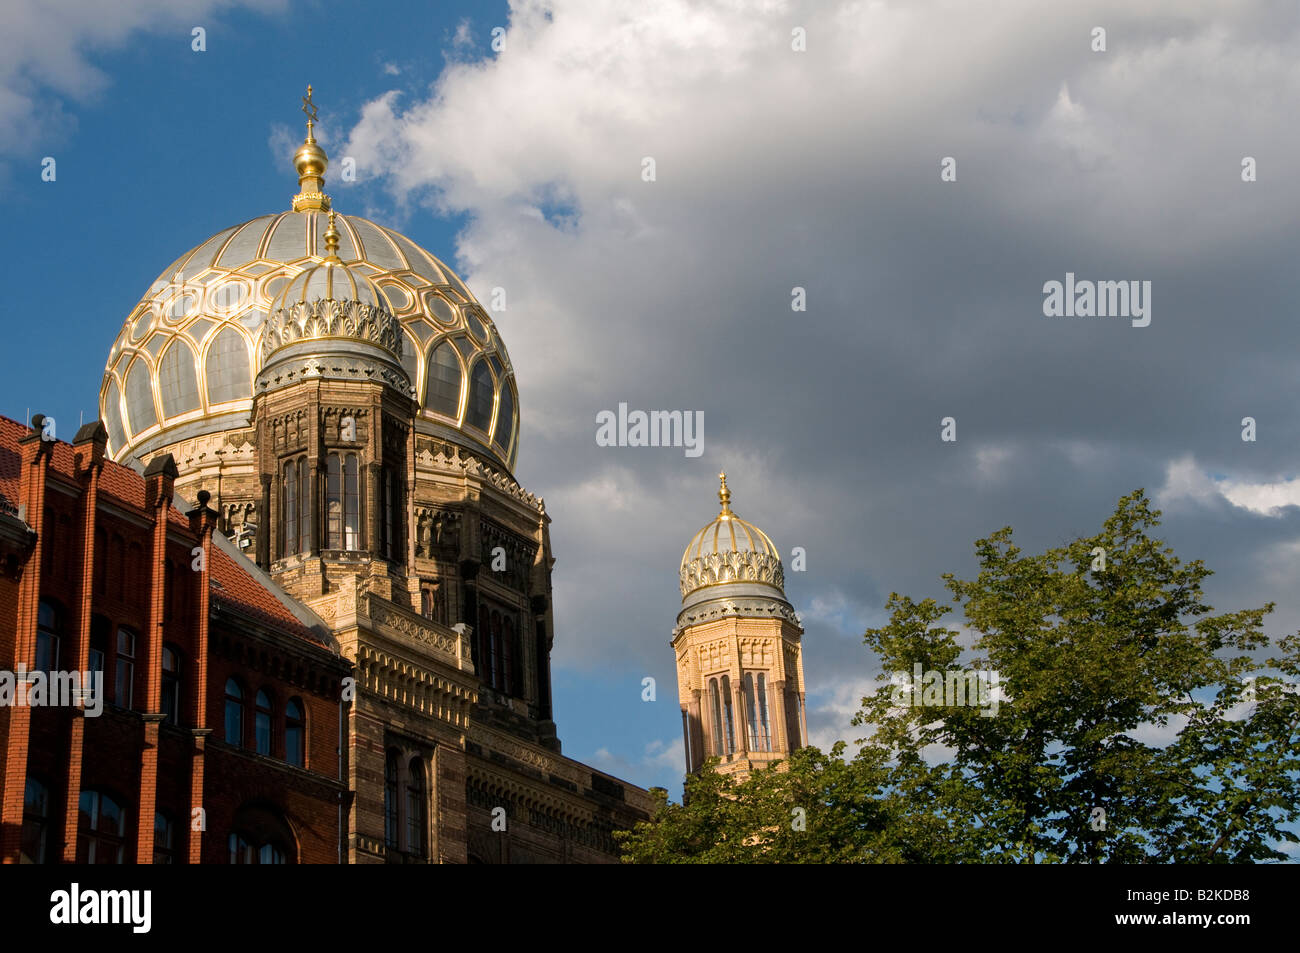 The mid-19th century Neue Synagoge New Jewish synagogue decorated with distinct Moorish style located on Oranienburger street in Berlin Germany Stock Photo